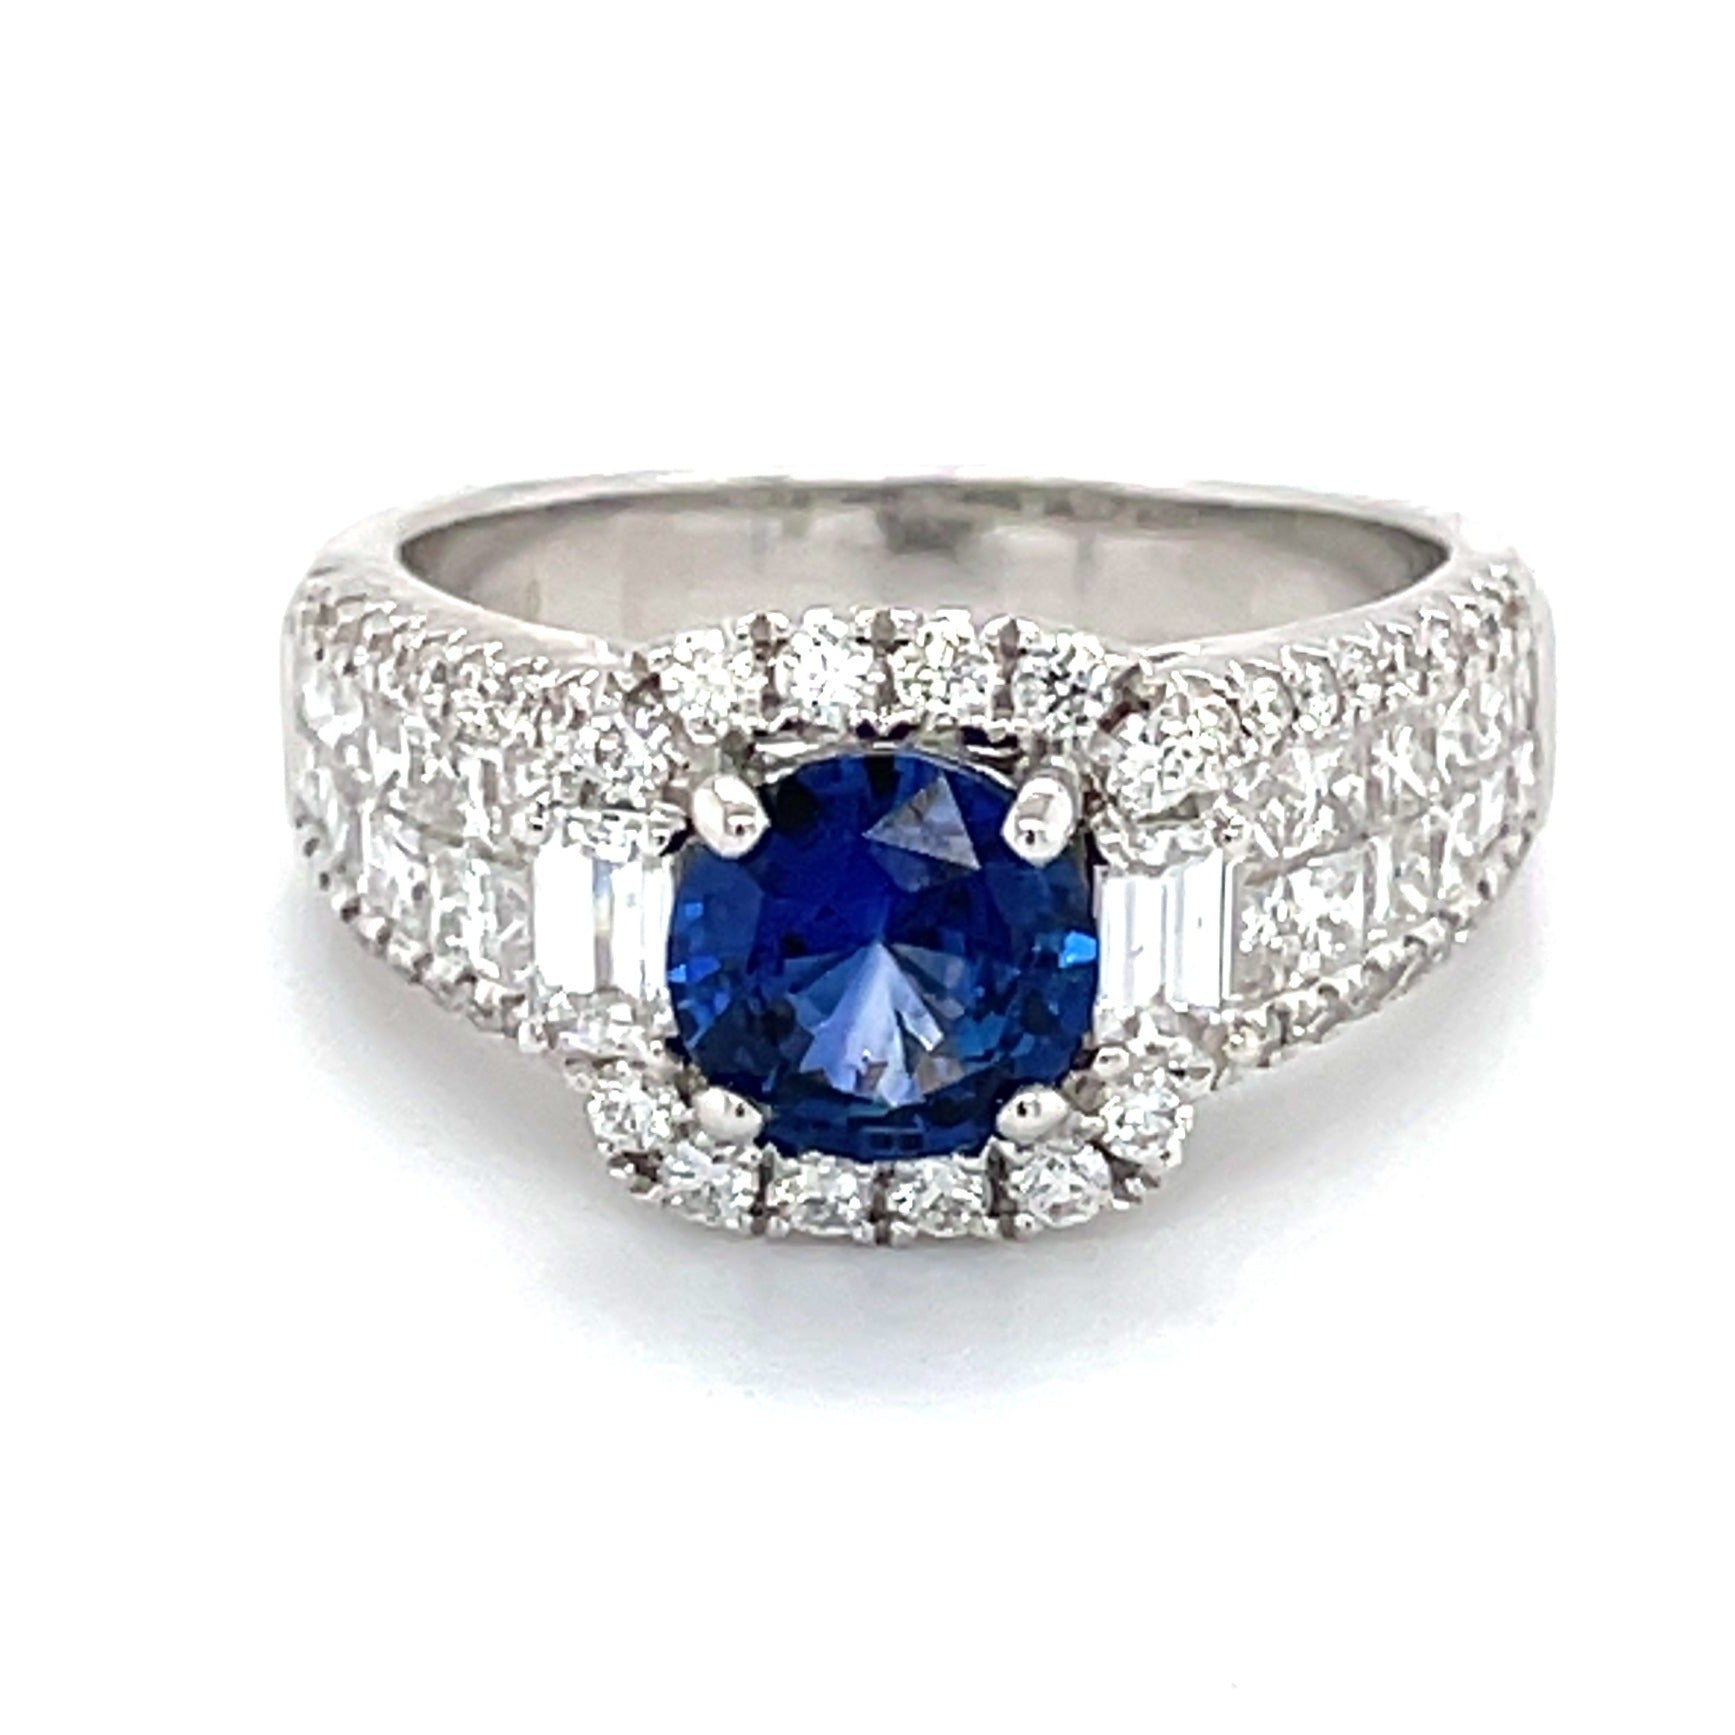 14k White Gold Ring With A Sapphire And White Diamonds #92740